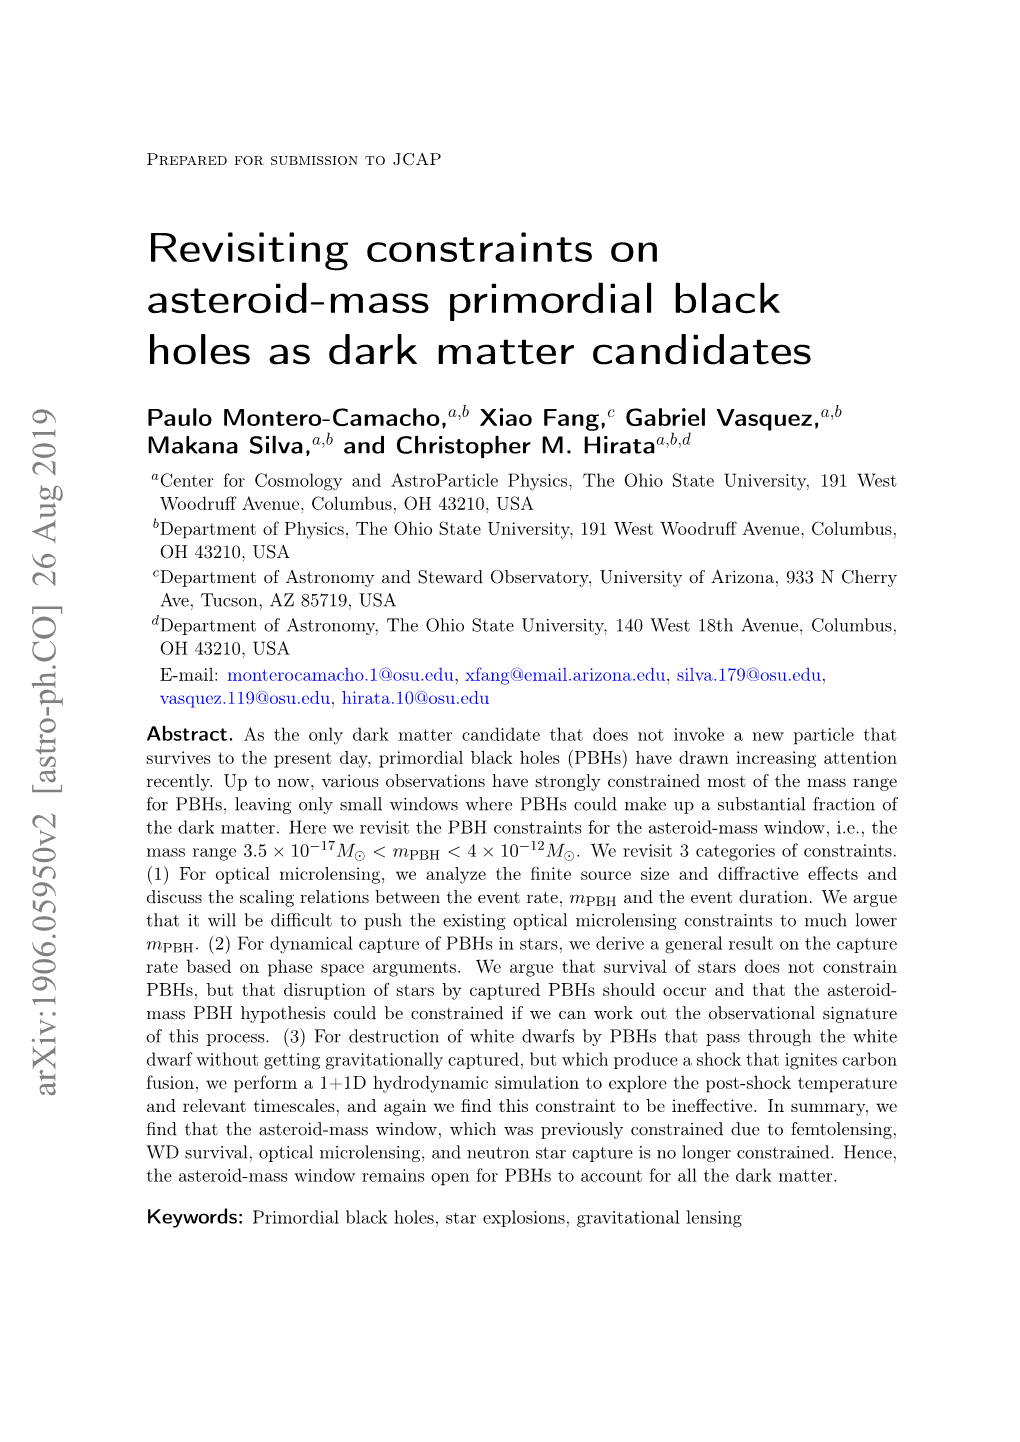 Revisiting Constraints on Asteroid-Mass Primordial Black Holes As Dark Matter Candidates